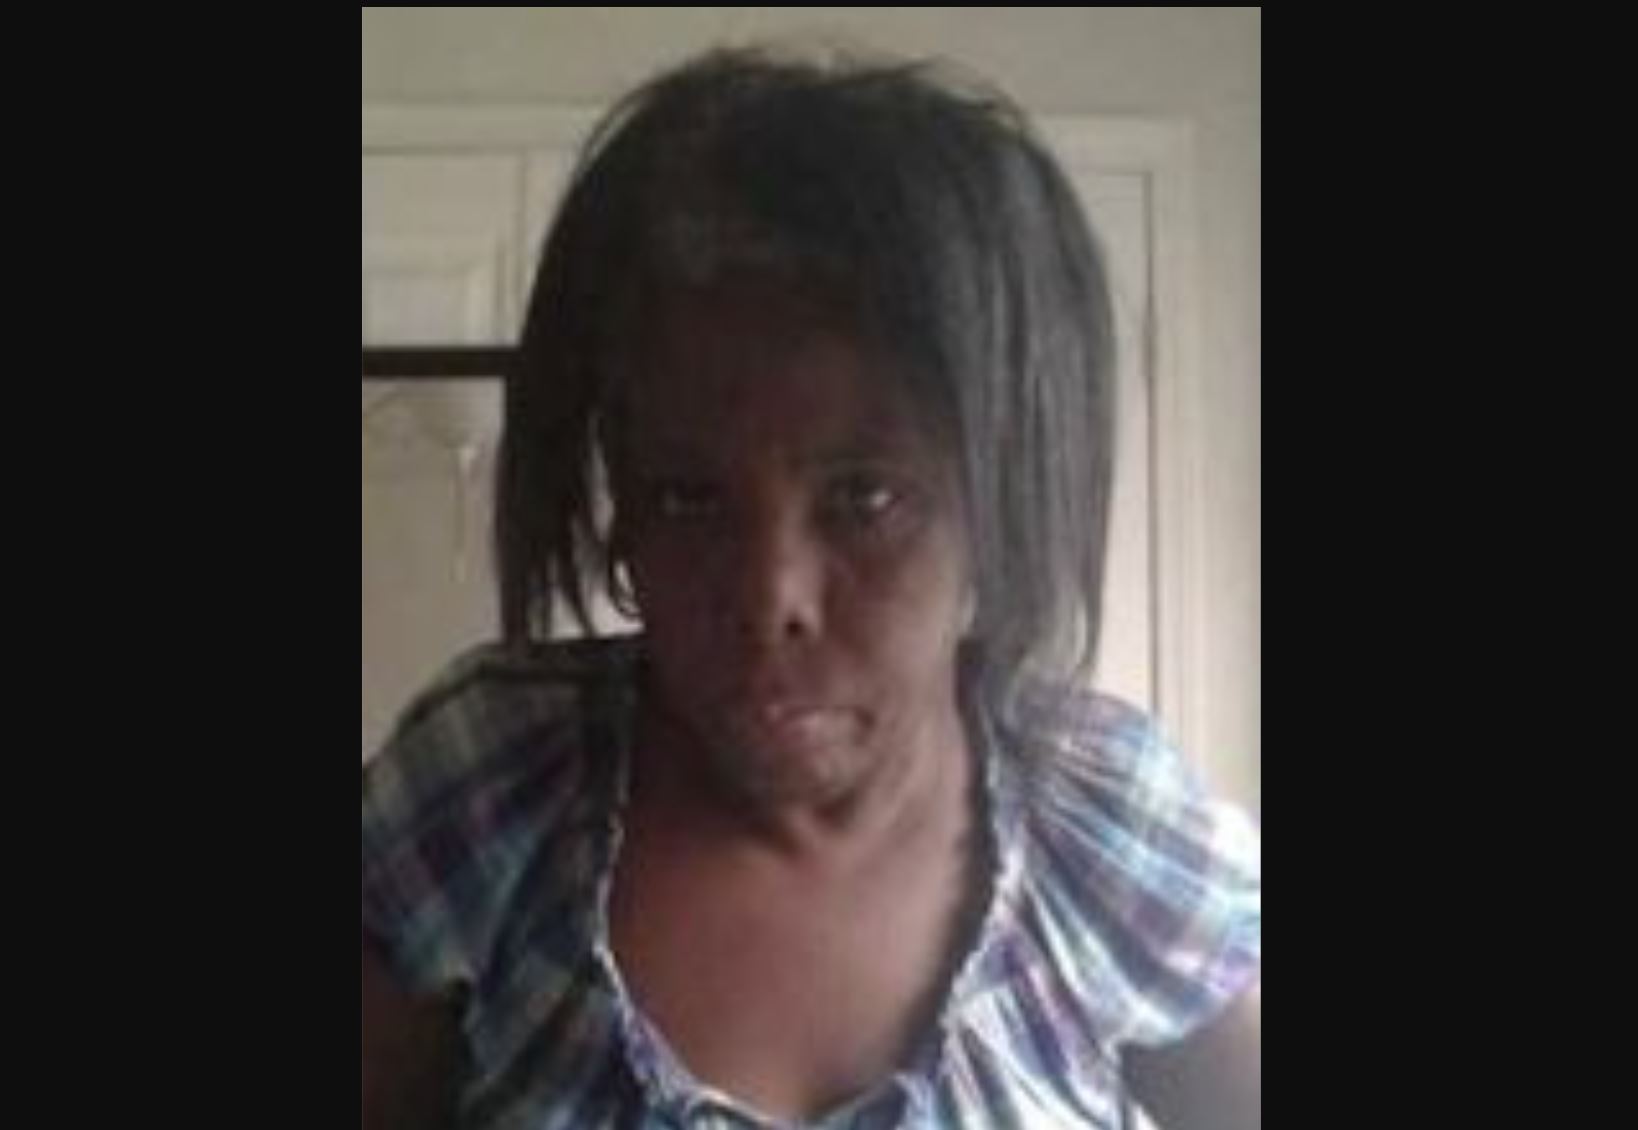 Missing and Endangered Person Alert issued for Mobile woman